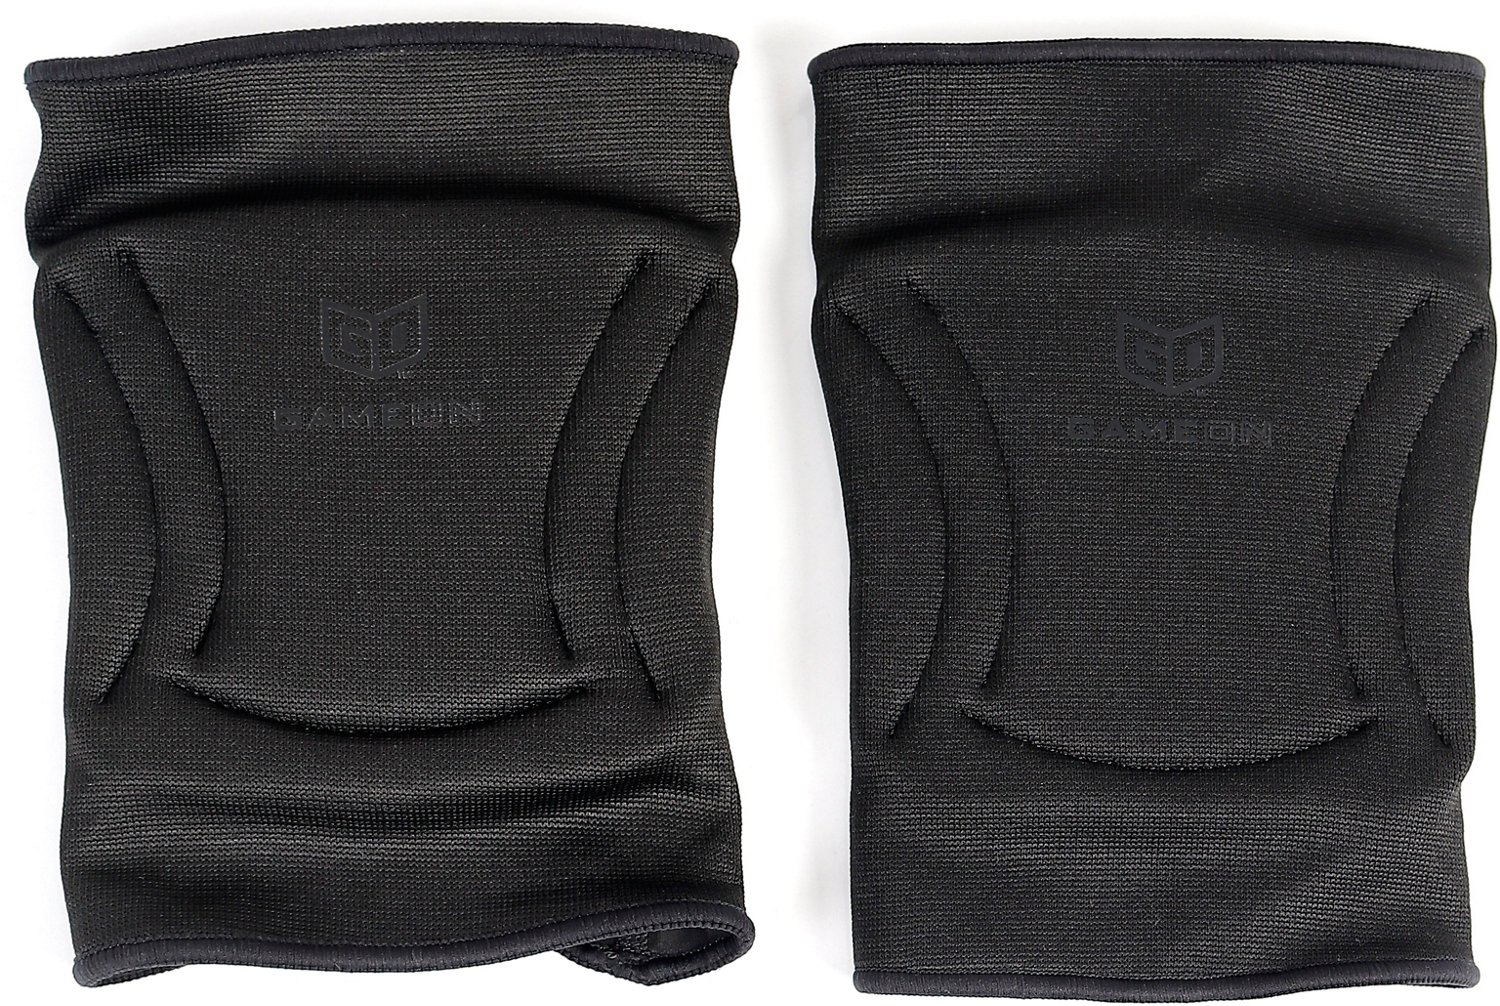 Game On Youth Volleyball Knee Pads                                                                                               - view number 1 selected